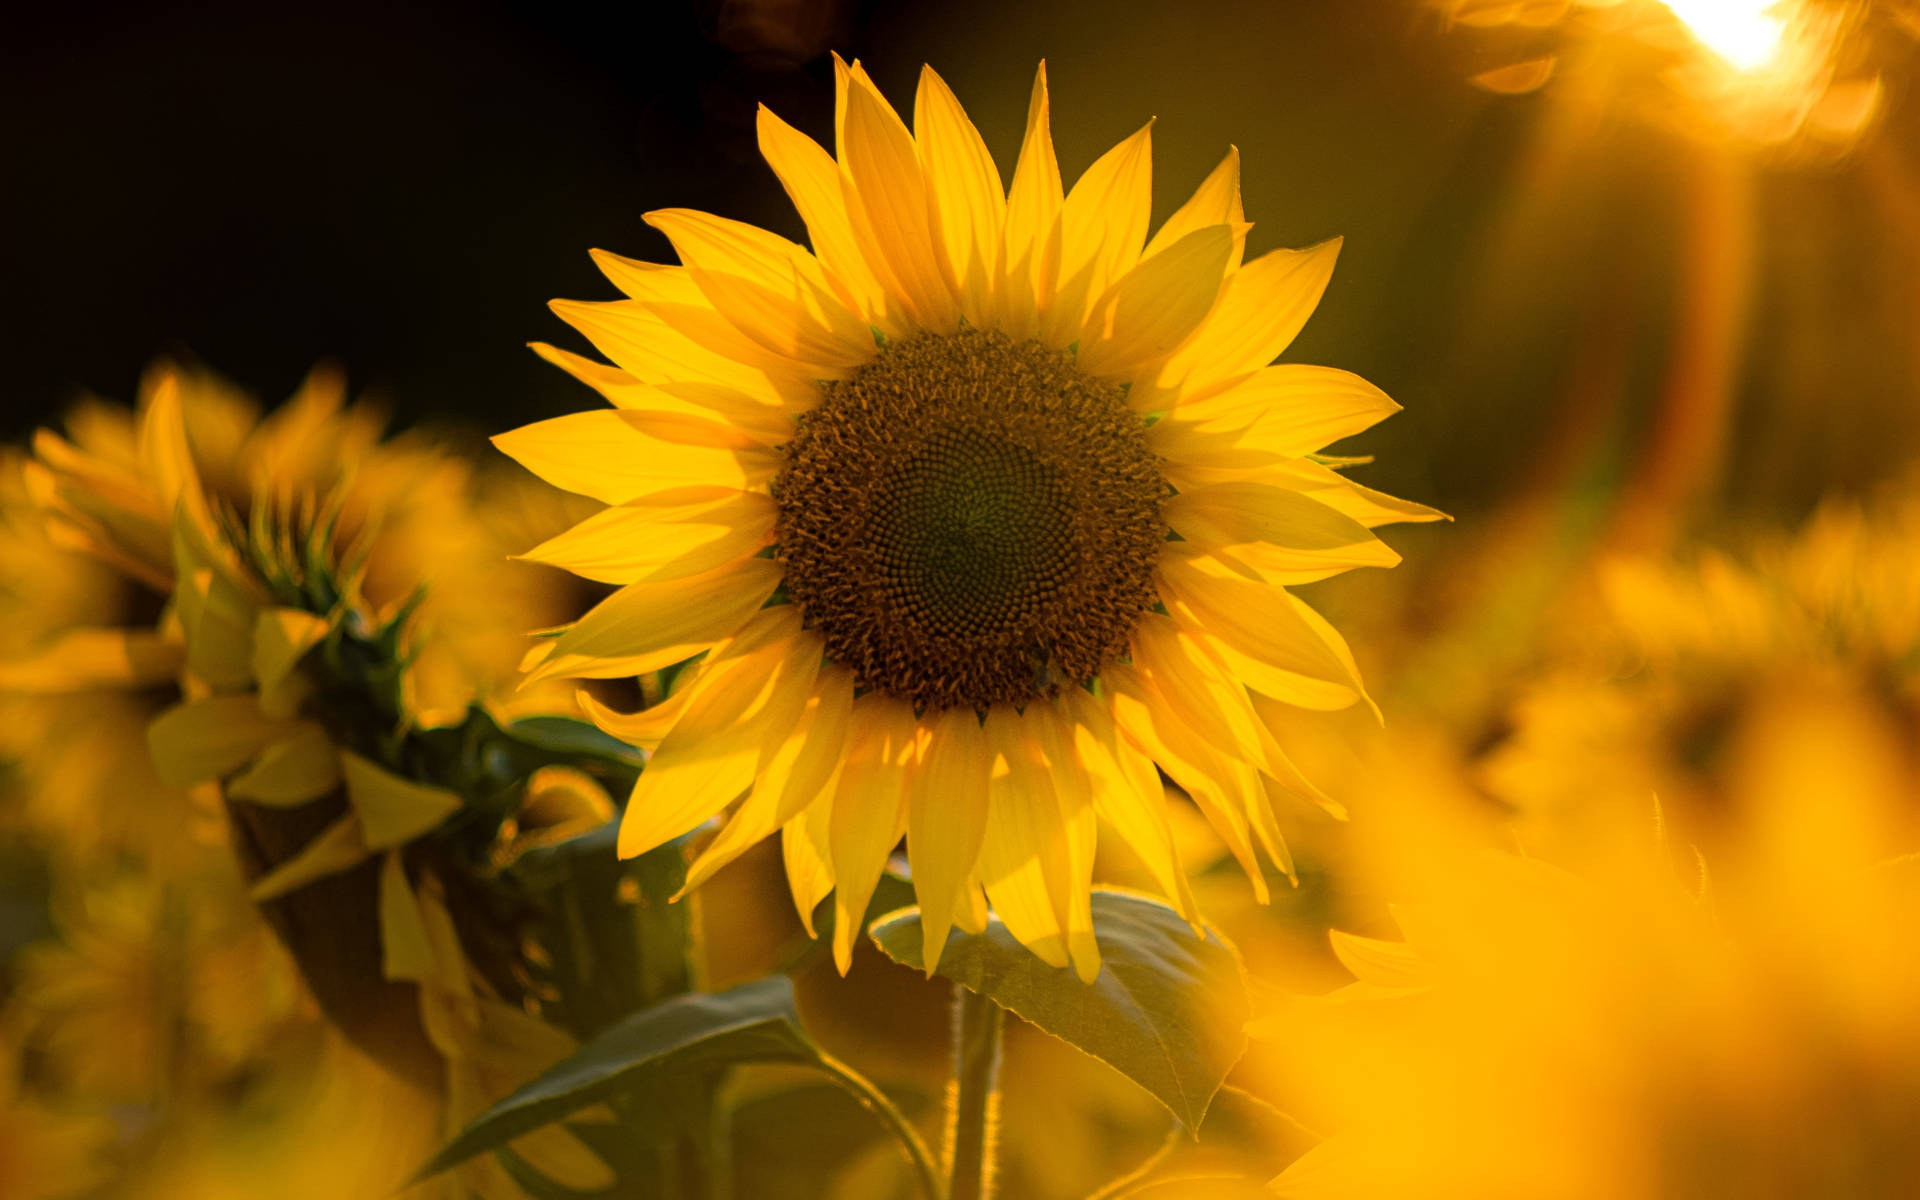 "The beauty of sunflowers and roses" Wallpaper